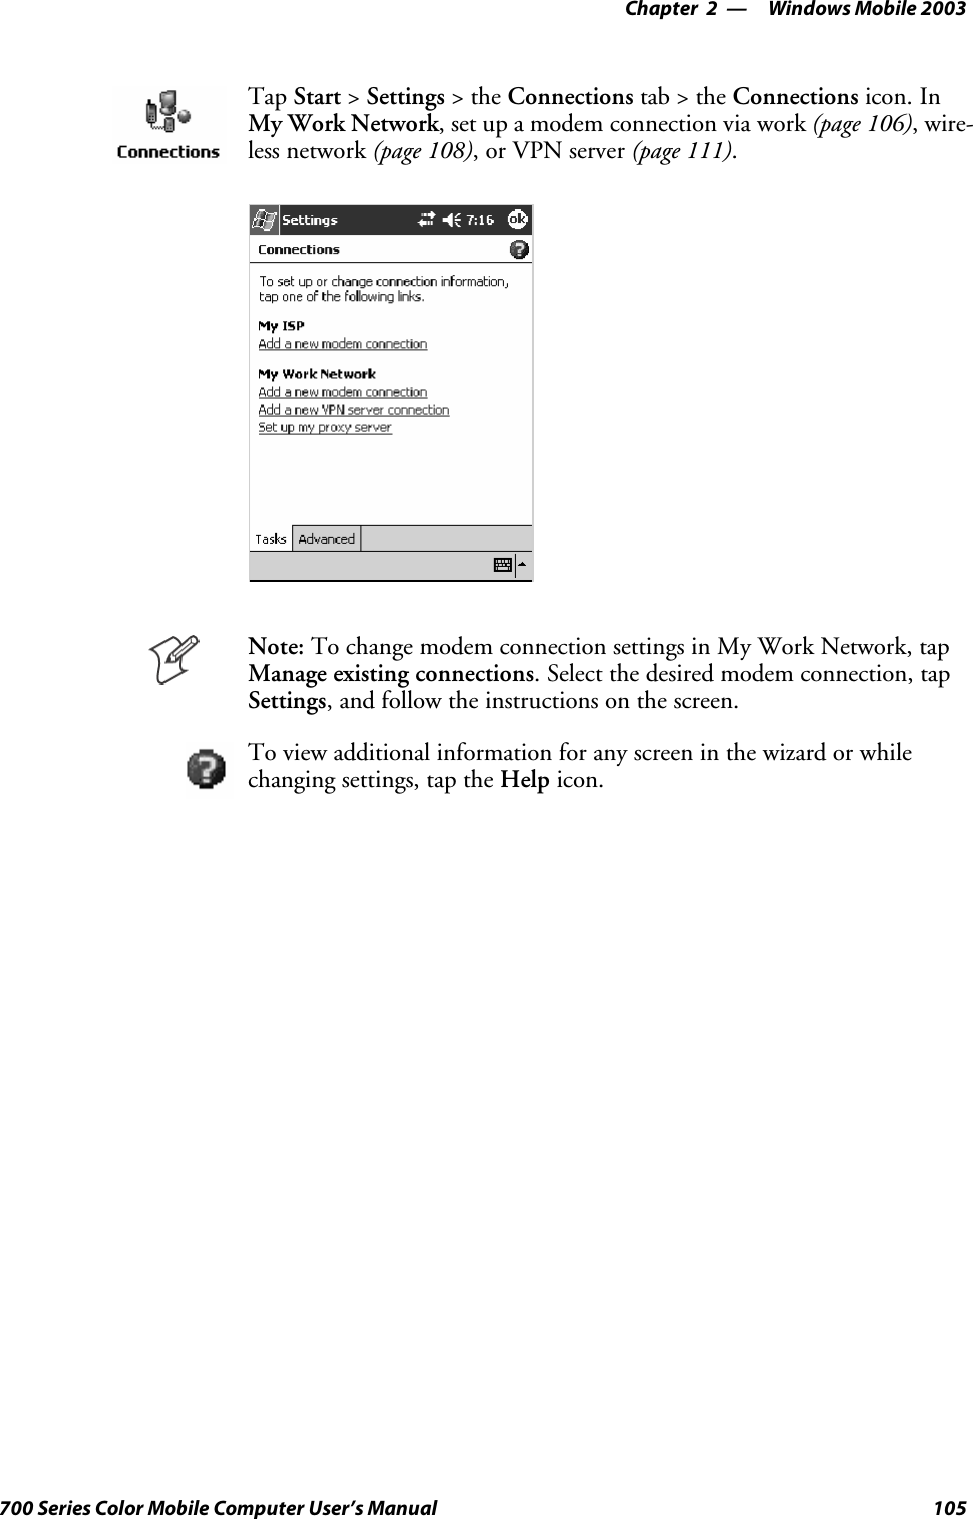 Windows Mobile 2003—Chapter 2105700 Series Color Mobile Computer User’s ManualTap Start &gt;Settings &gt;theConnections tab&gt;theConnections icon. InMy Work Network, set up a modem connection via work (page 106),wire-less network (page 108), or VPN server (page 111).Note: To change modem connection settings in My Work Network, tapManage existing connections. Select the desired modem connection, tapSettings, and follow the instructions on the screen.To view additional information for any screen in the wizard or whilechanging settings, tap the Help icon.